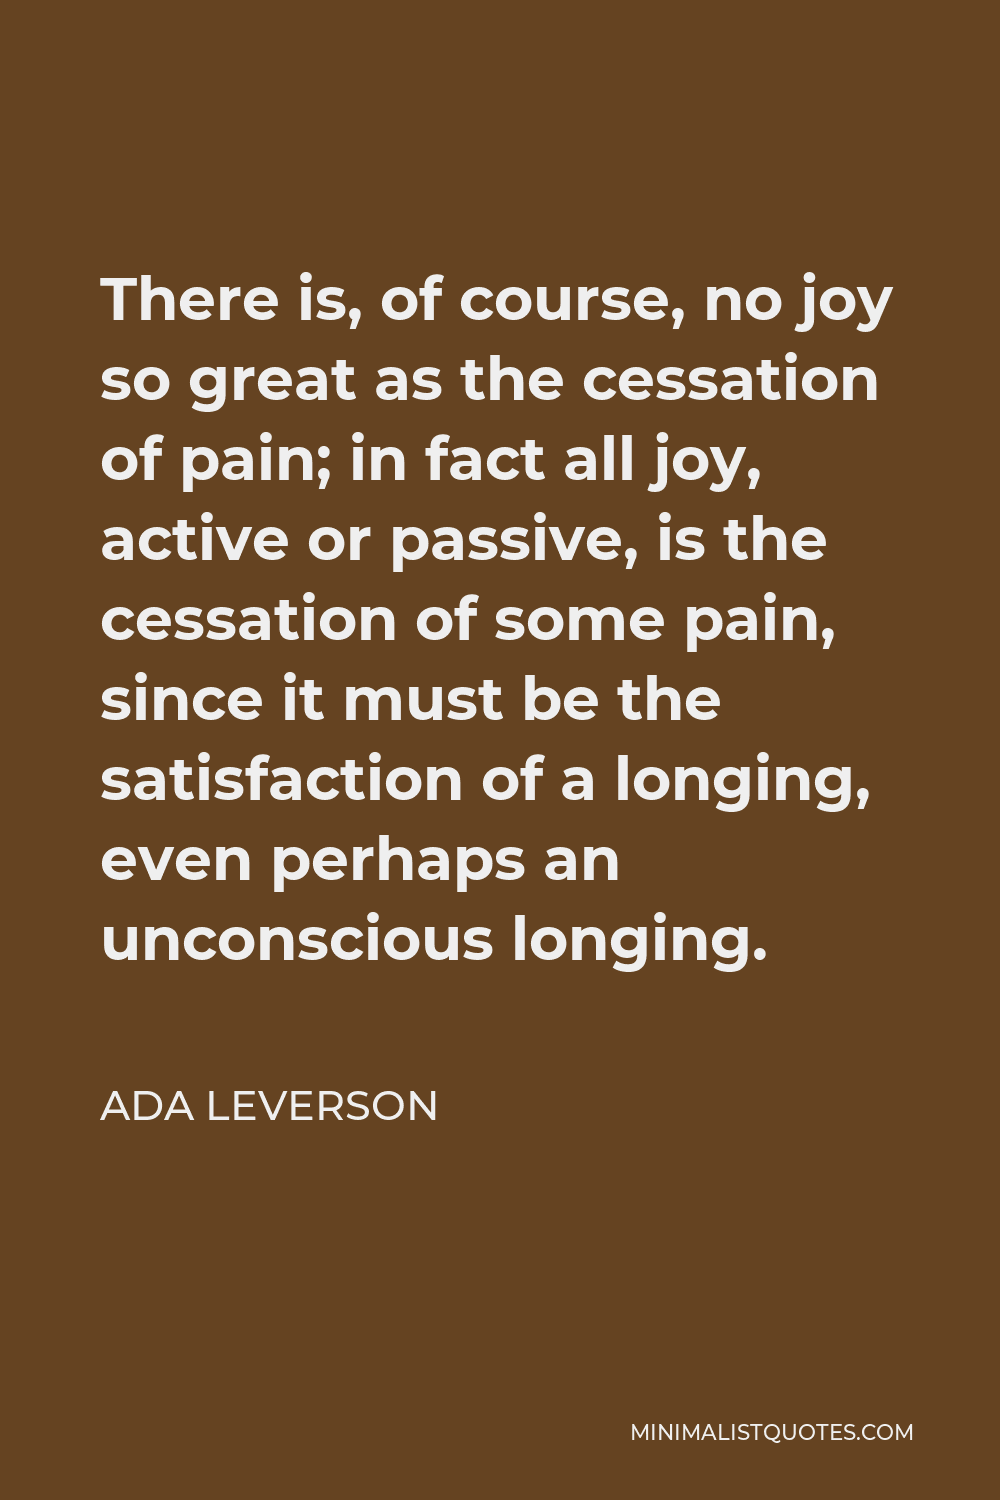 Ada Leverson Quote - There is, of course, no joy so great as the cessation of pain; in fact all joy, active or passive, is the cessation of some pain, since it must be the satisfaction of a longing, even perhaps an unconscious longing.